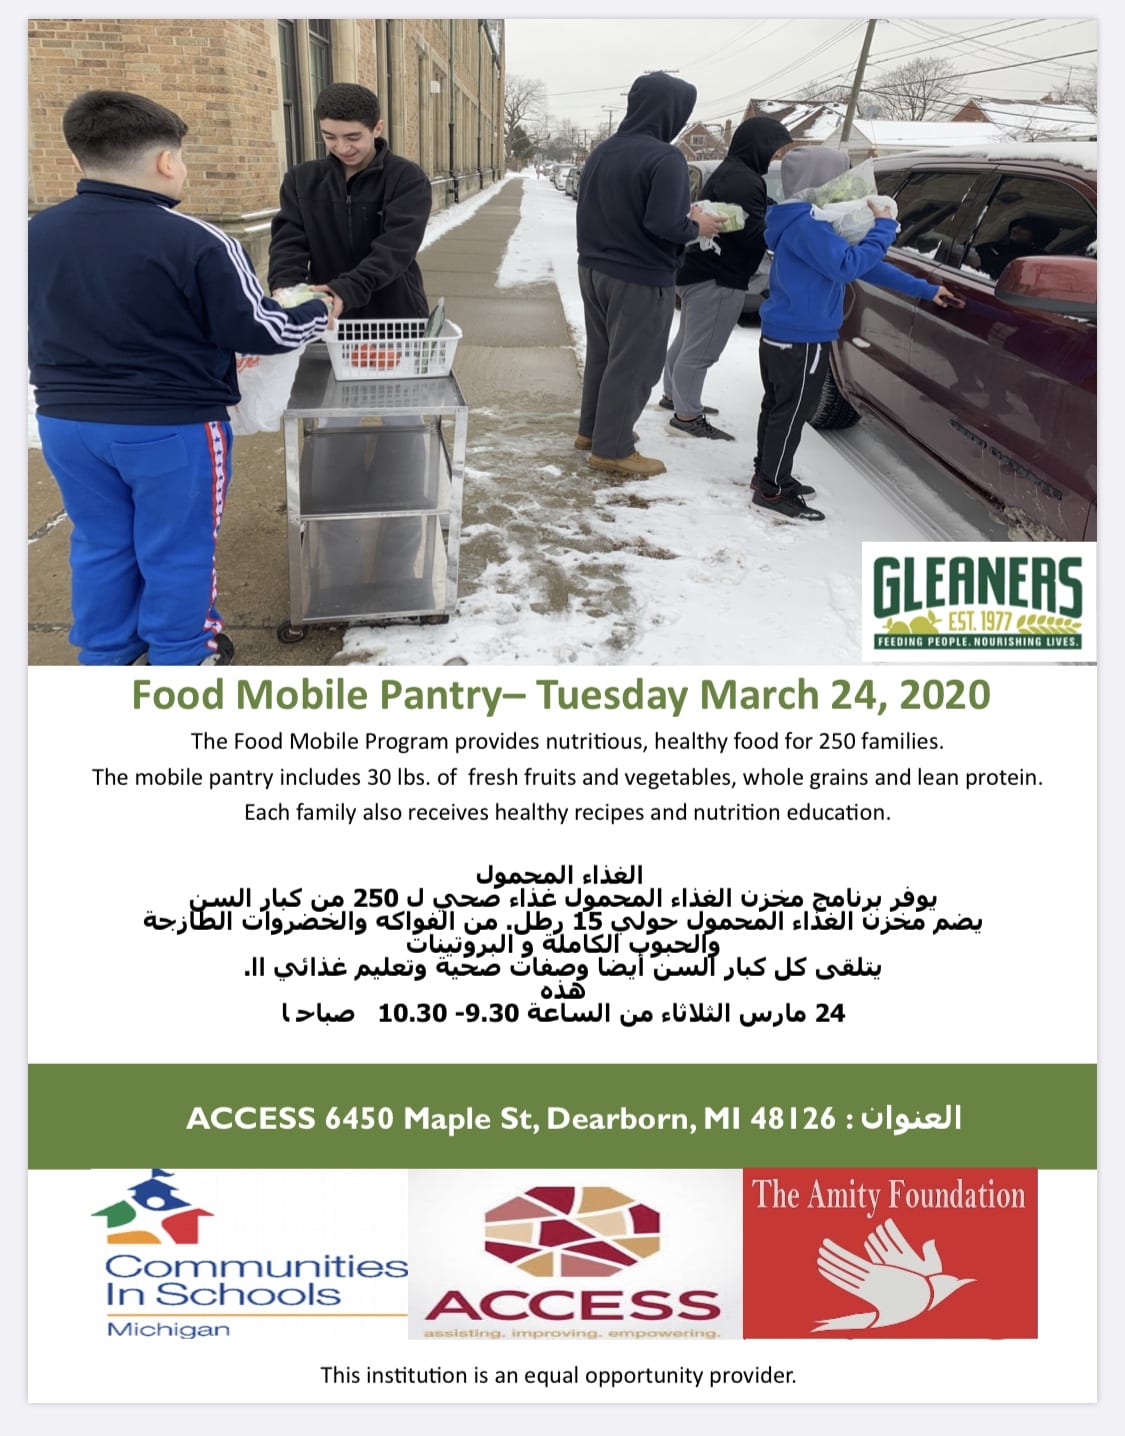 Food Mobile Pantry-Tuesday March 24 at 9:15